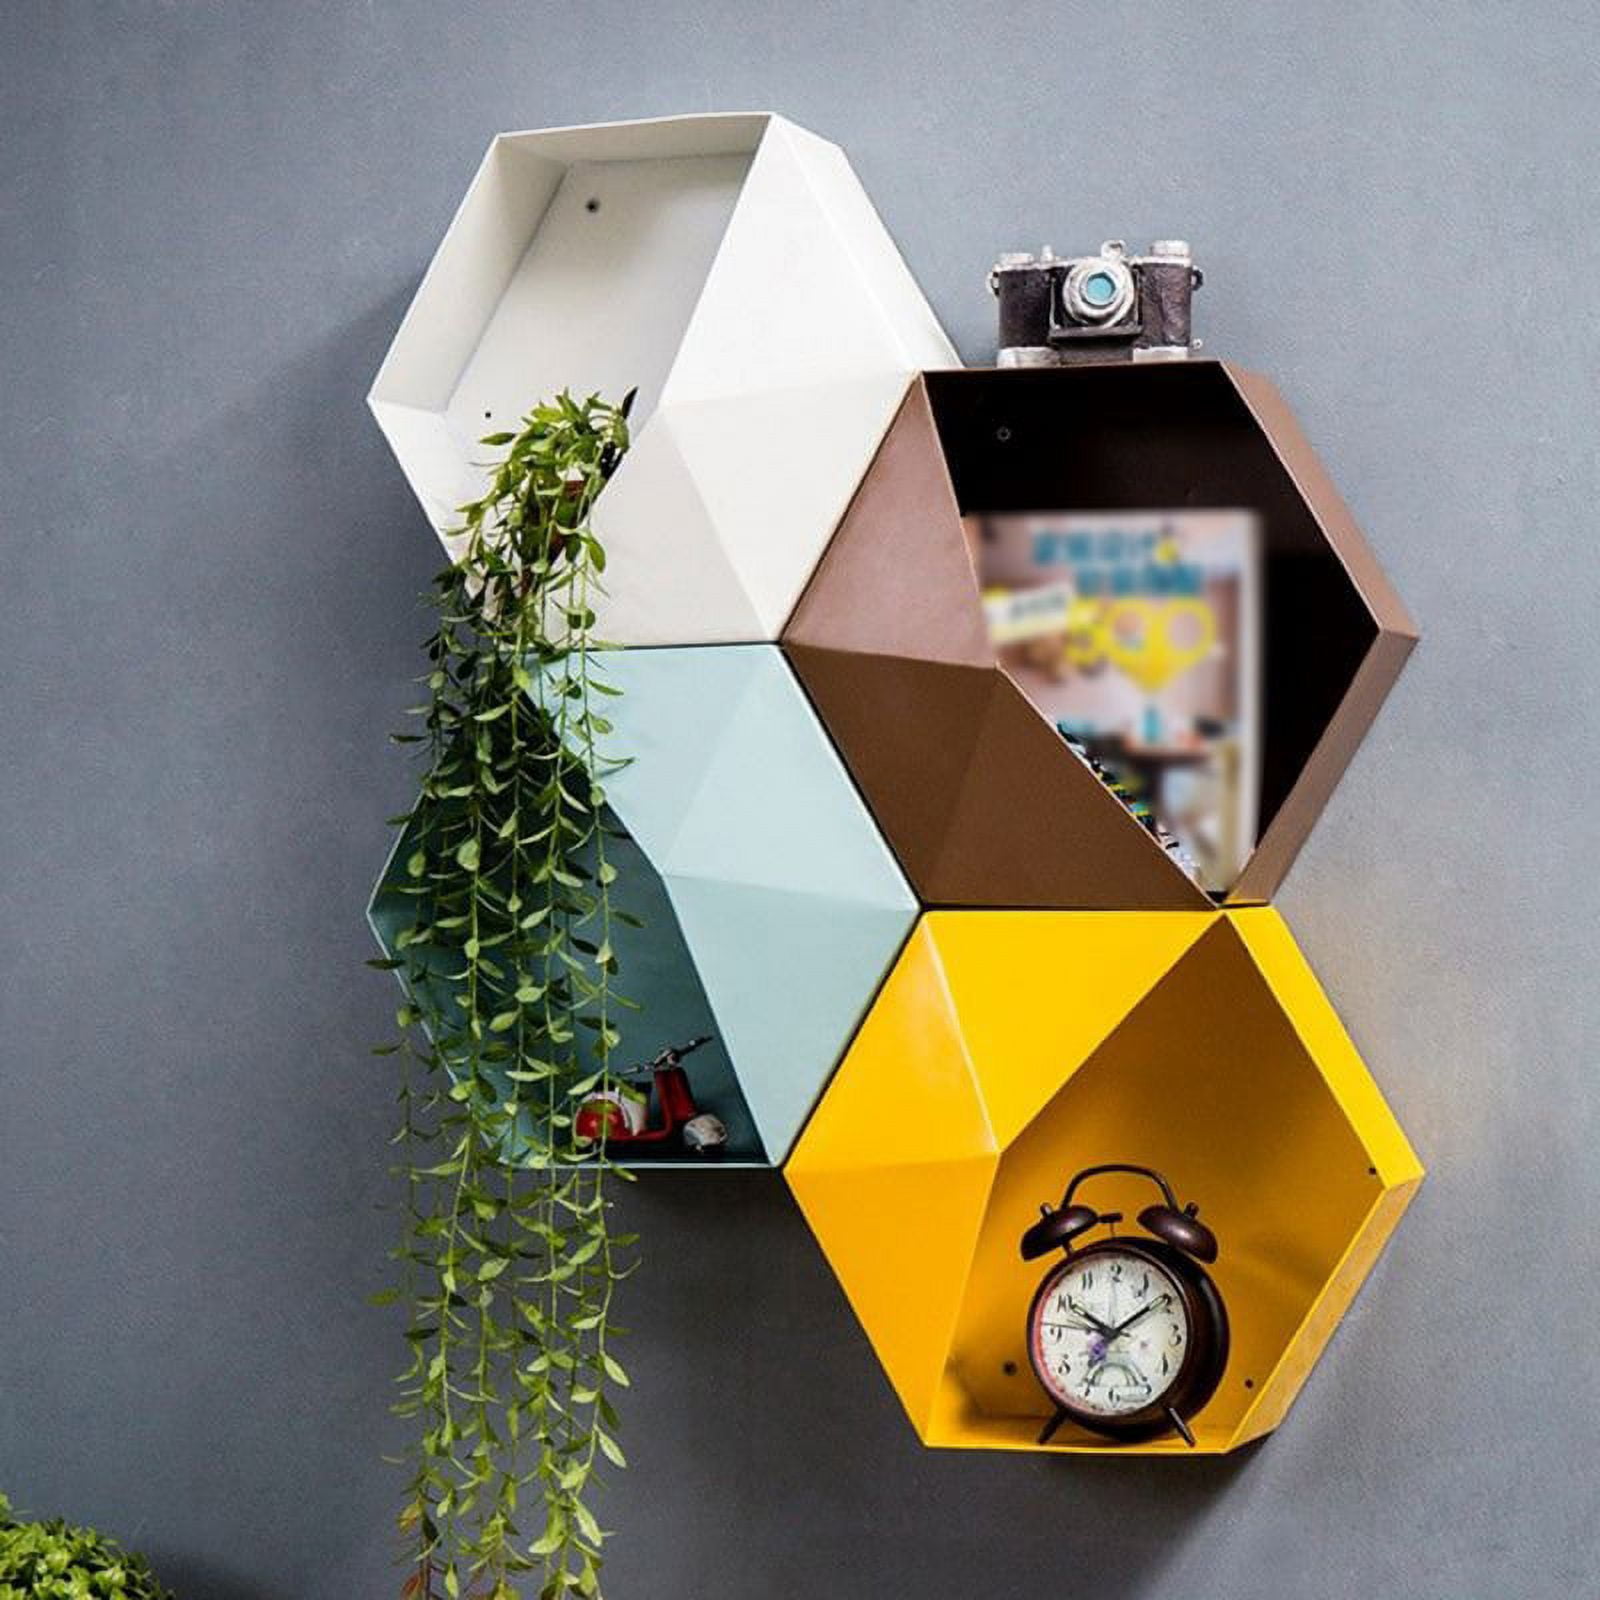 ZYN Stacking Organizer for Honeycomb Wall. by KiloxTango